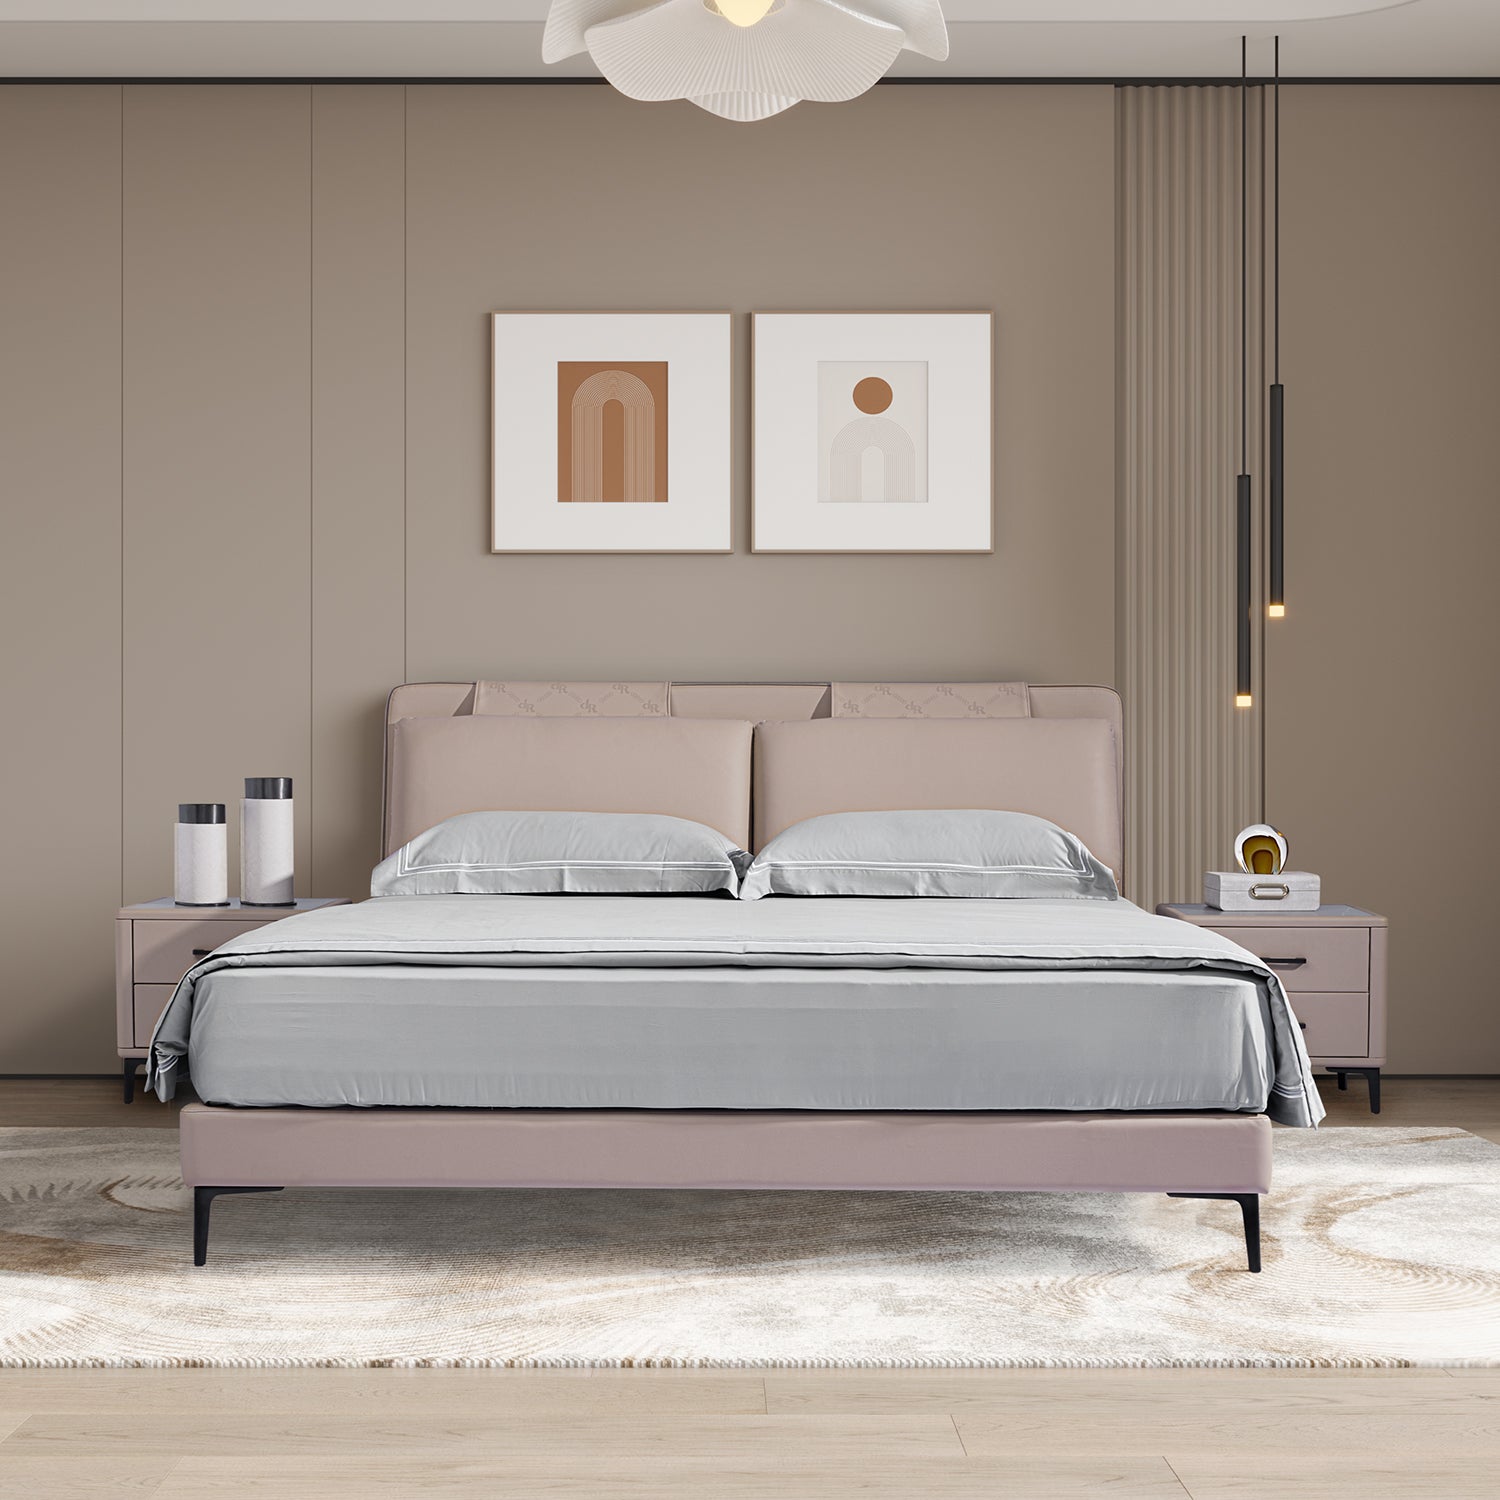 Modern bedroom featuring beige leather bed frame BOC1-006 with gray bedding, flanked by two nightstands and minimalist wall art.